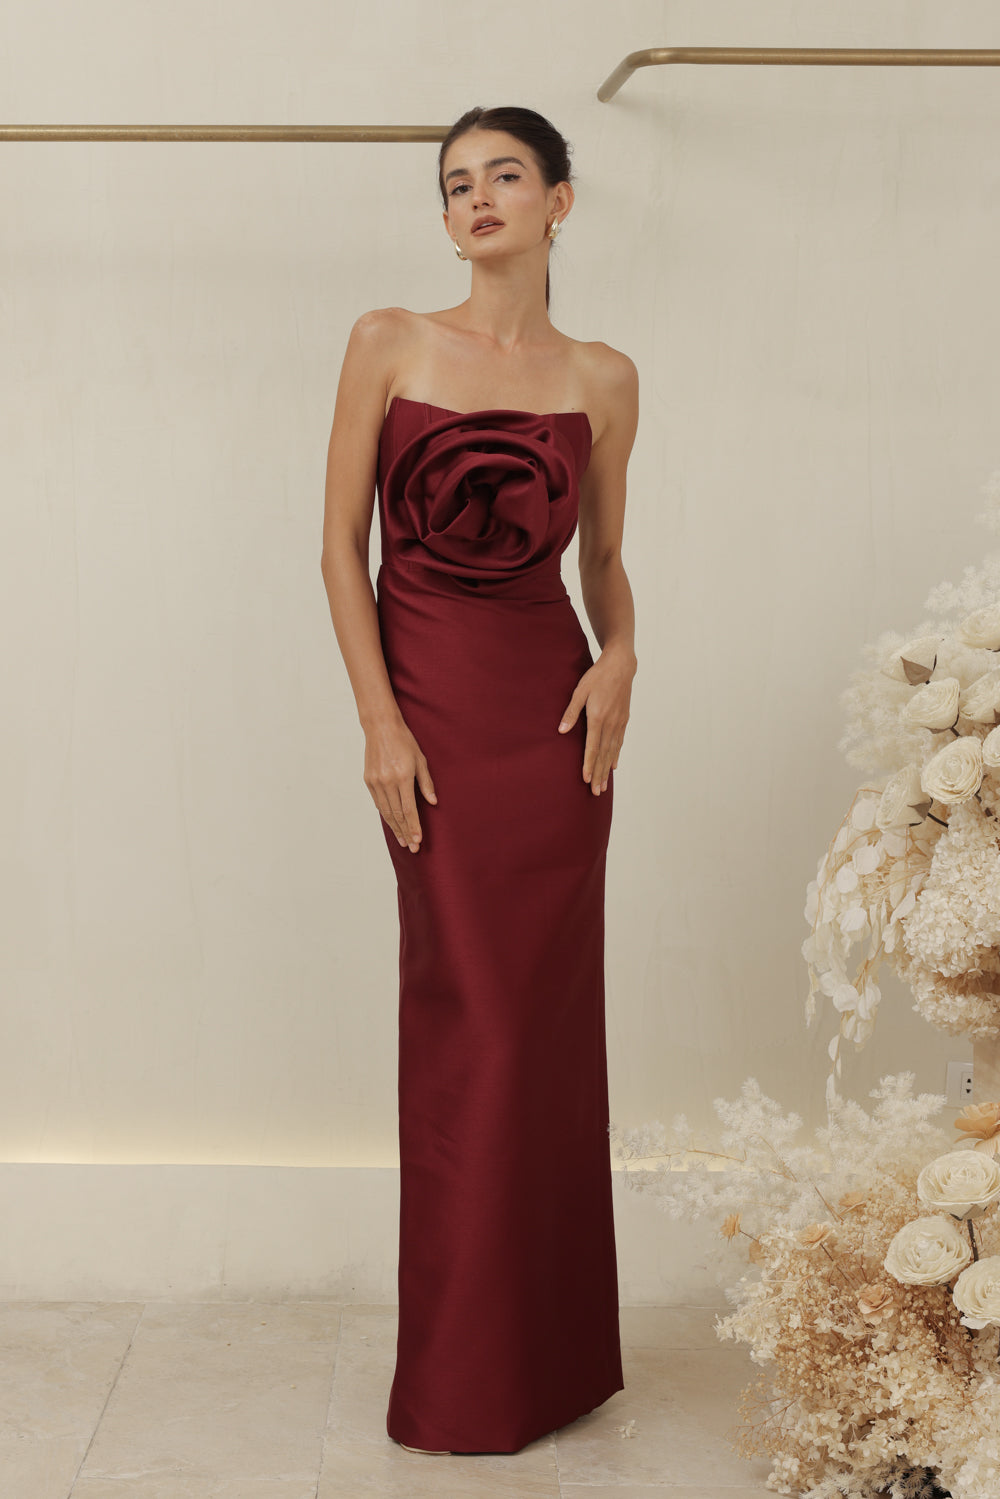 ZOO LABEL COUTURE VIVIENNE GOWN Strapless Corset Pencil Skirt Gown with Oversize Floral Detail (Dark Maroon Gazaar)